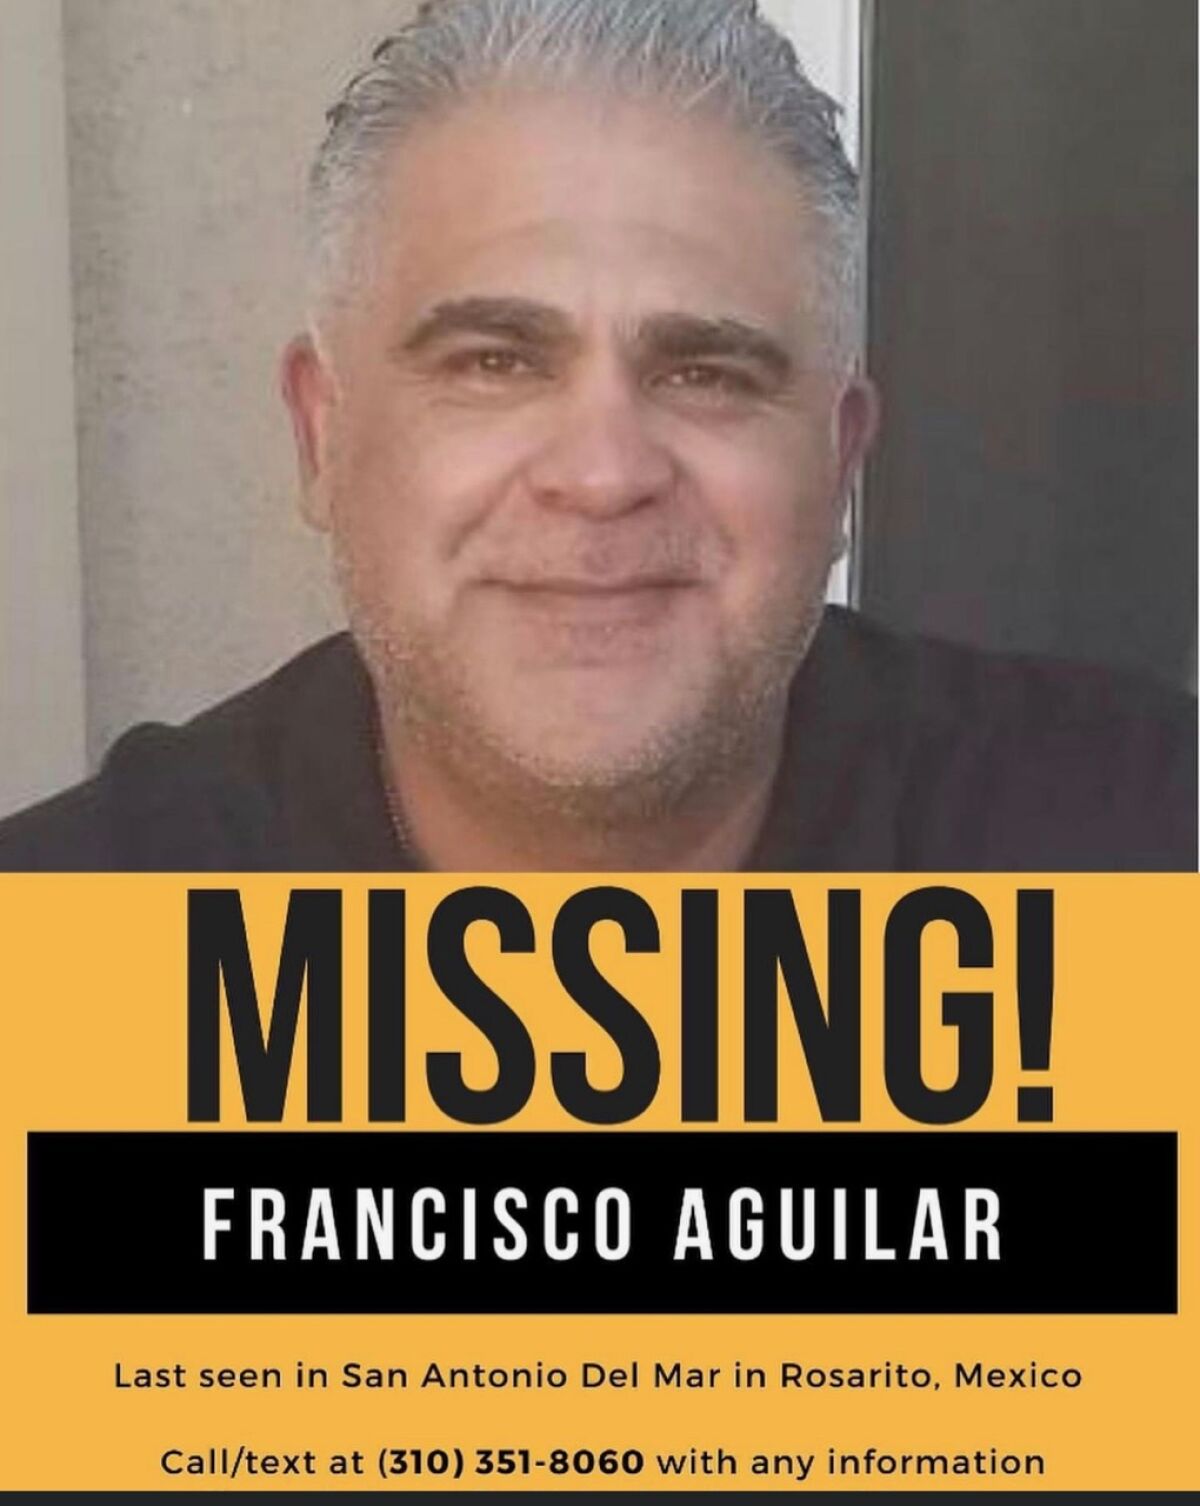 Flyer with photo of missing firefighter Francisco Aguilar